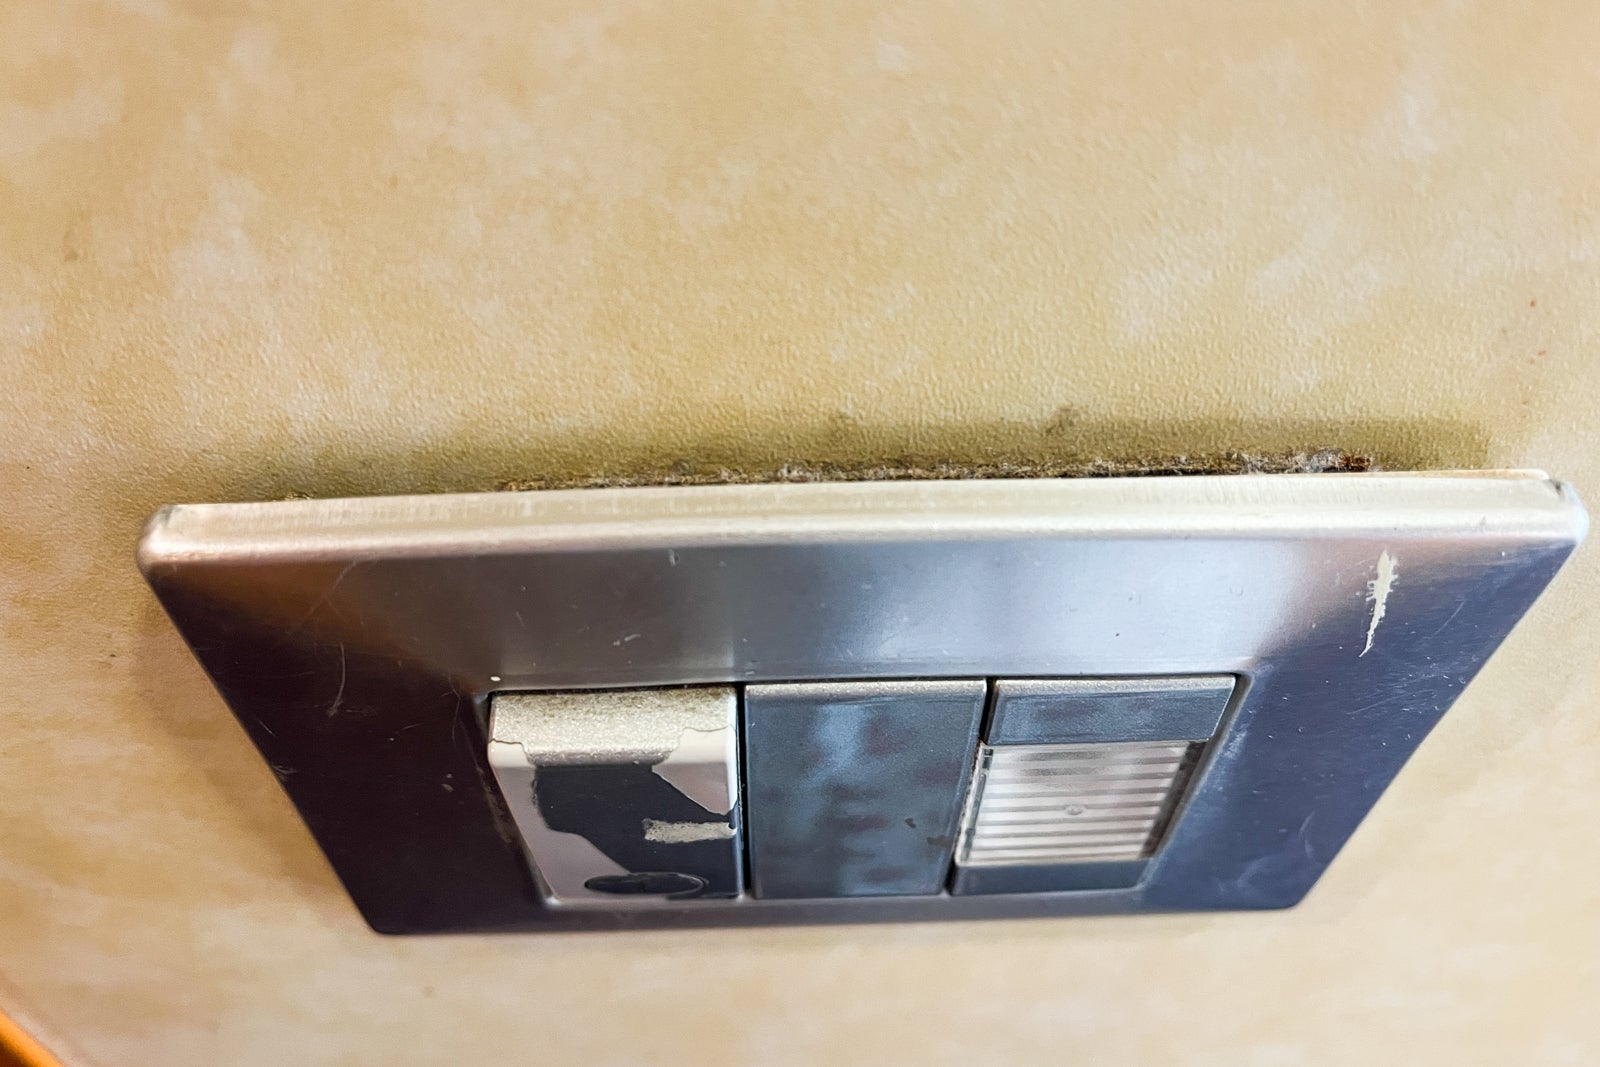 Signs of wear and tear in cabin on Carnival Sunshine